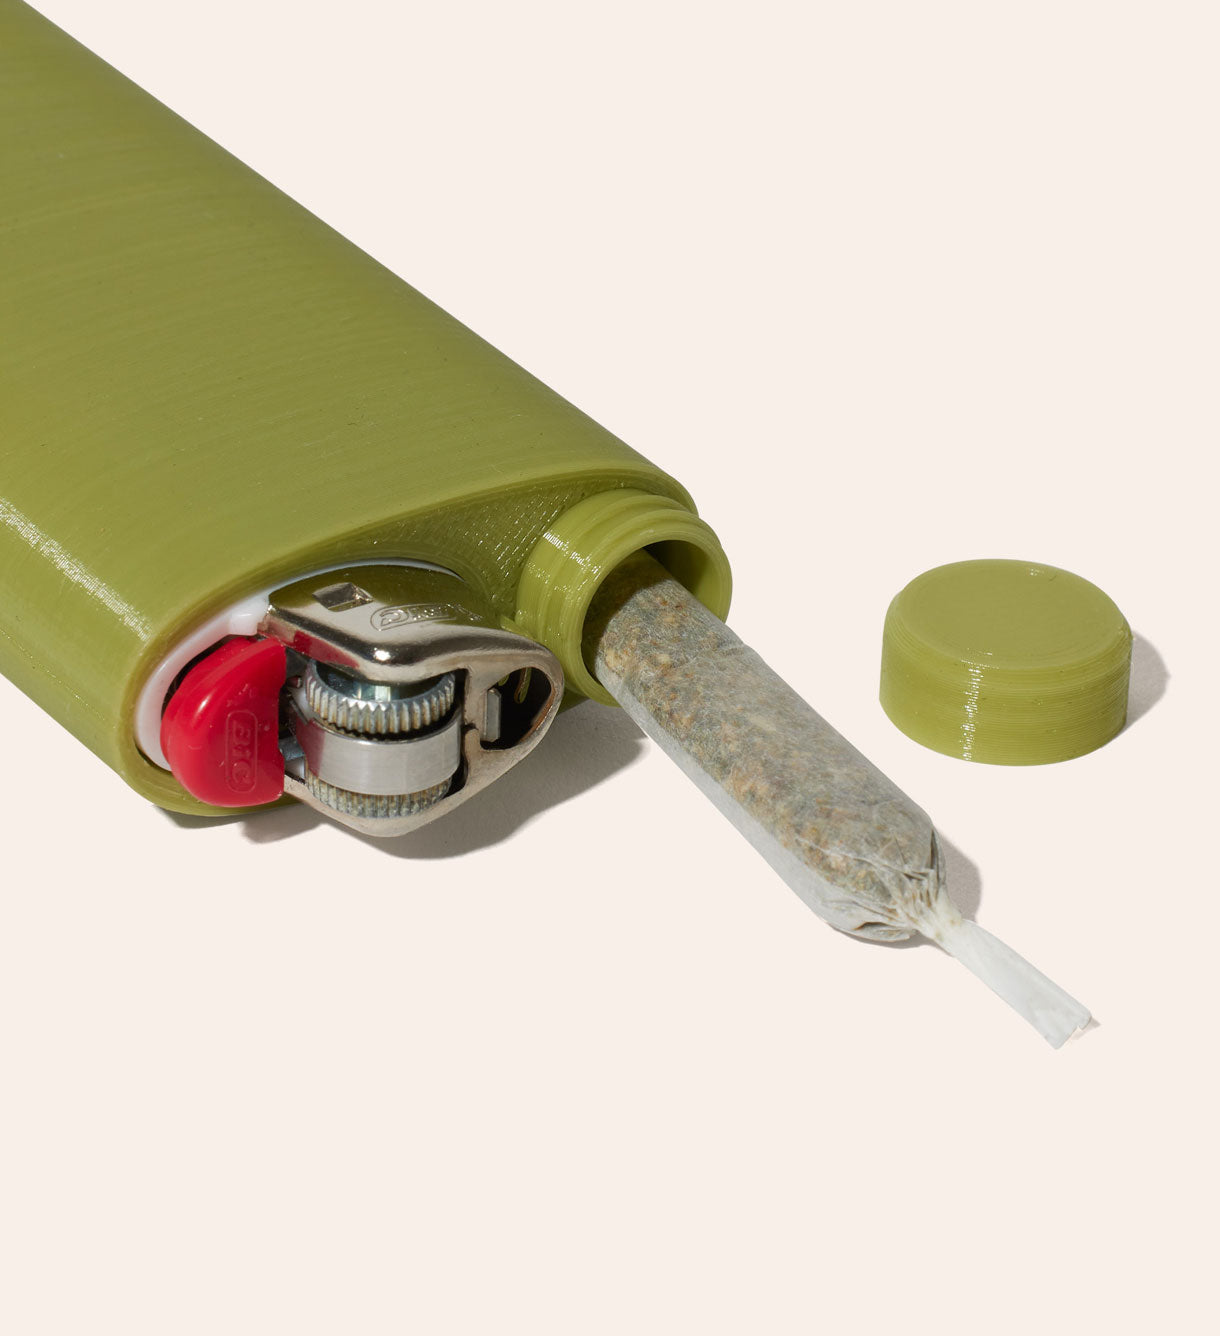 This Can Koozie Has Pockets To Hold Your Lighter and Two Joints